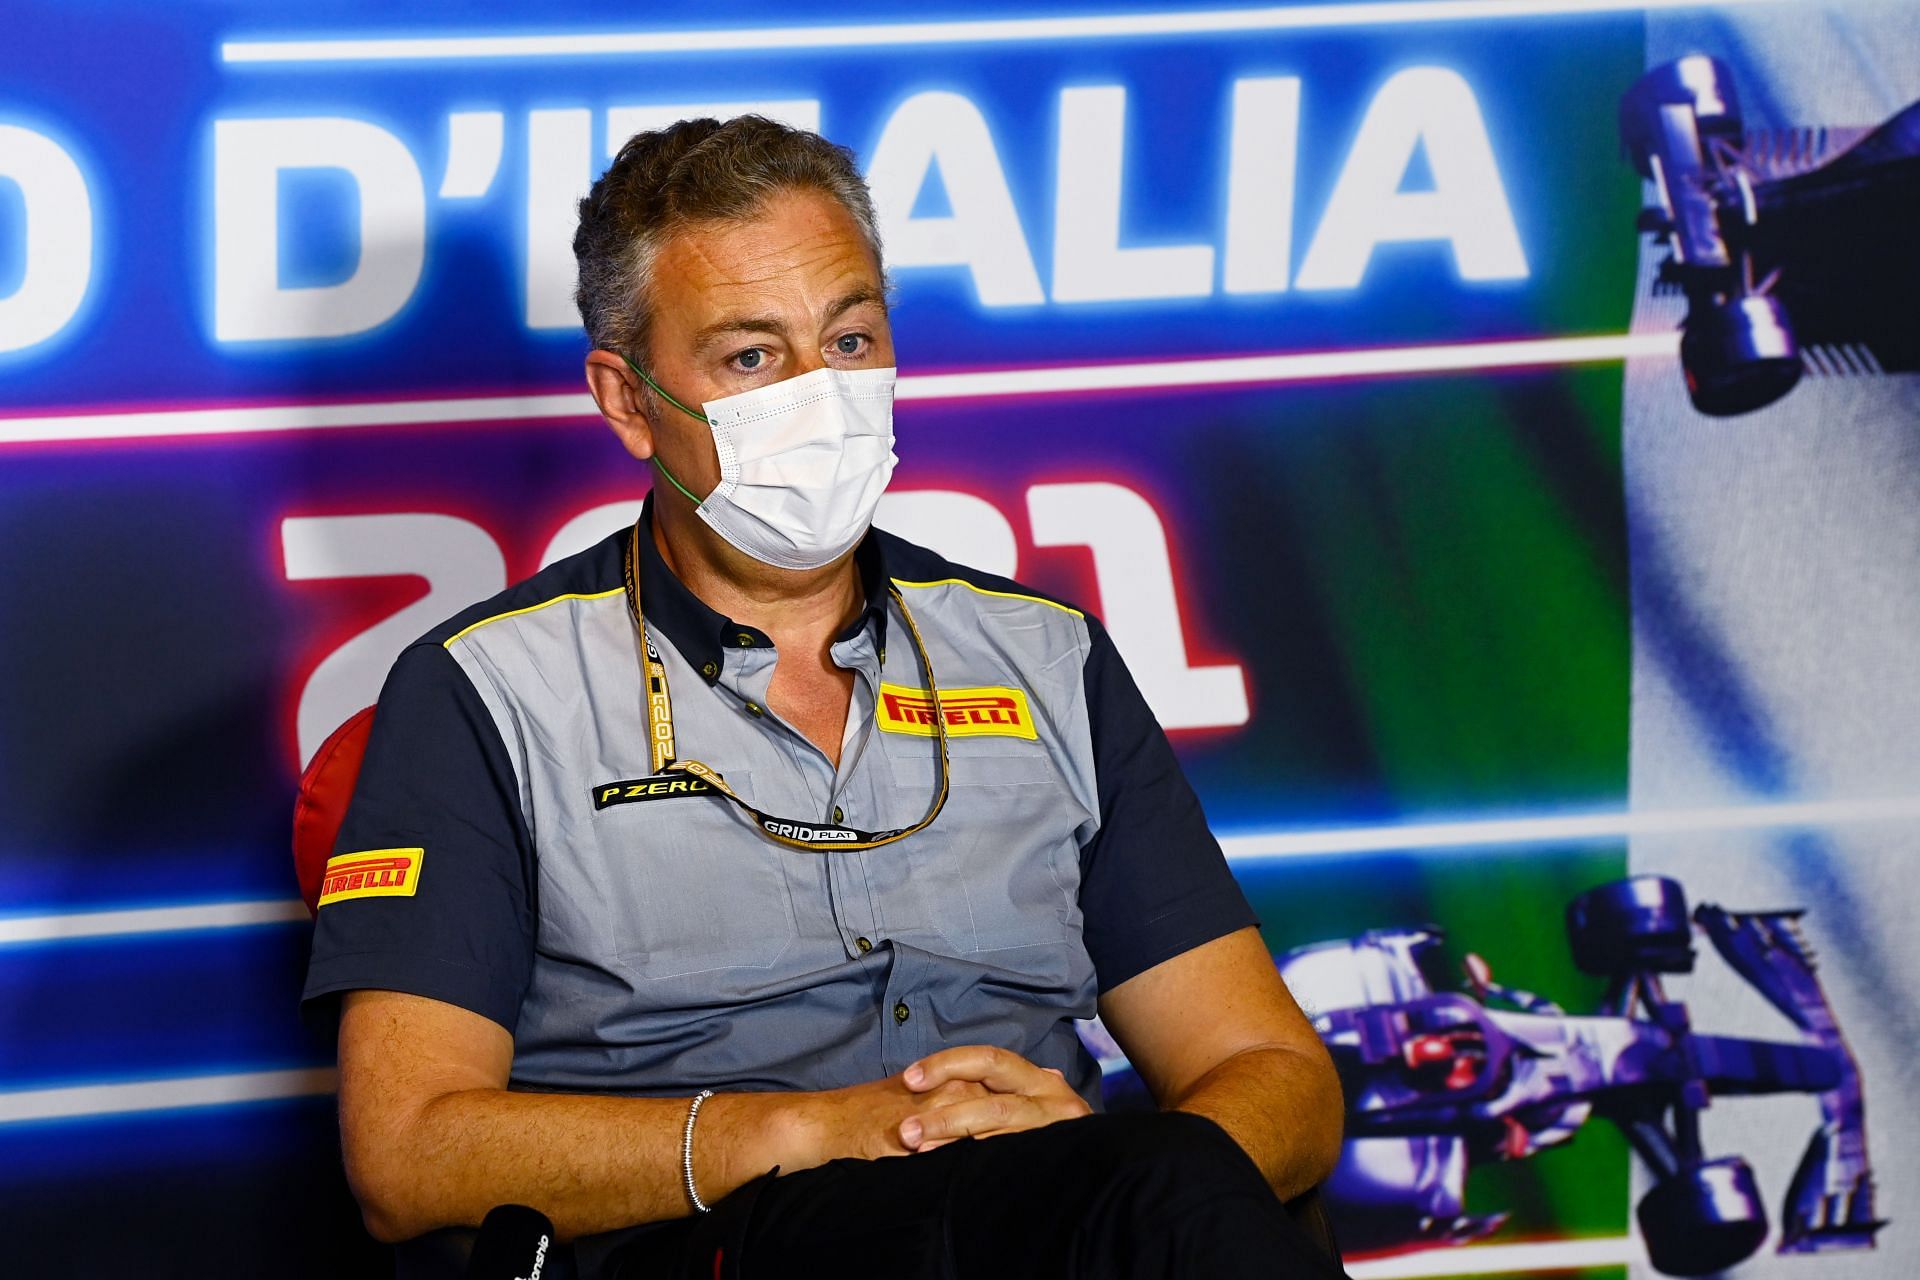 Director of Pirelli F1 Mario Isola talks in the Team Principals Press Conference in Monza, Italy. (Photo by Mark Sutton - Pool/Getty Images)